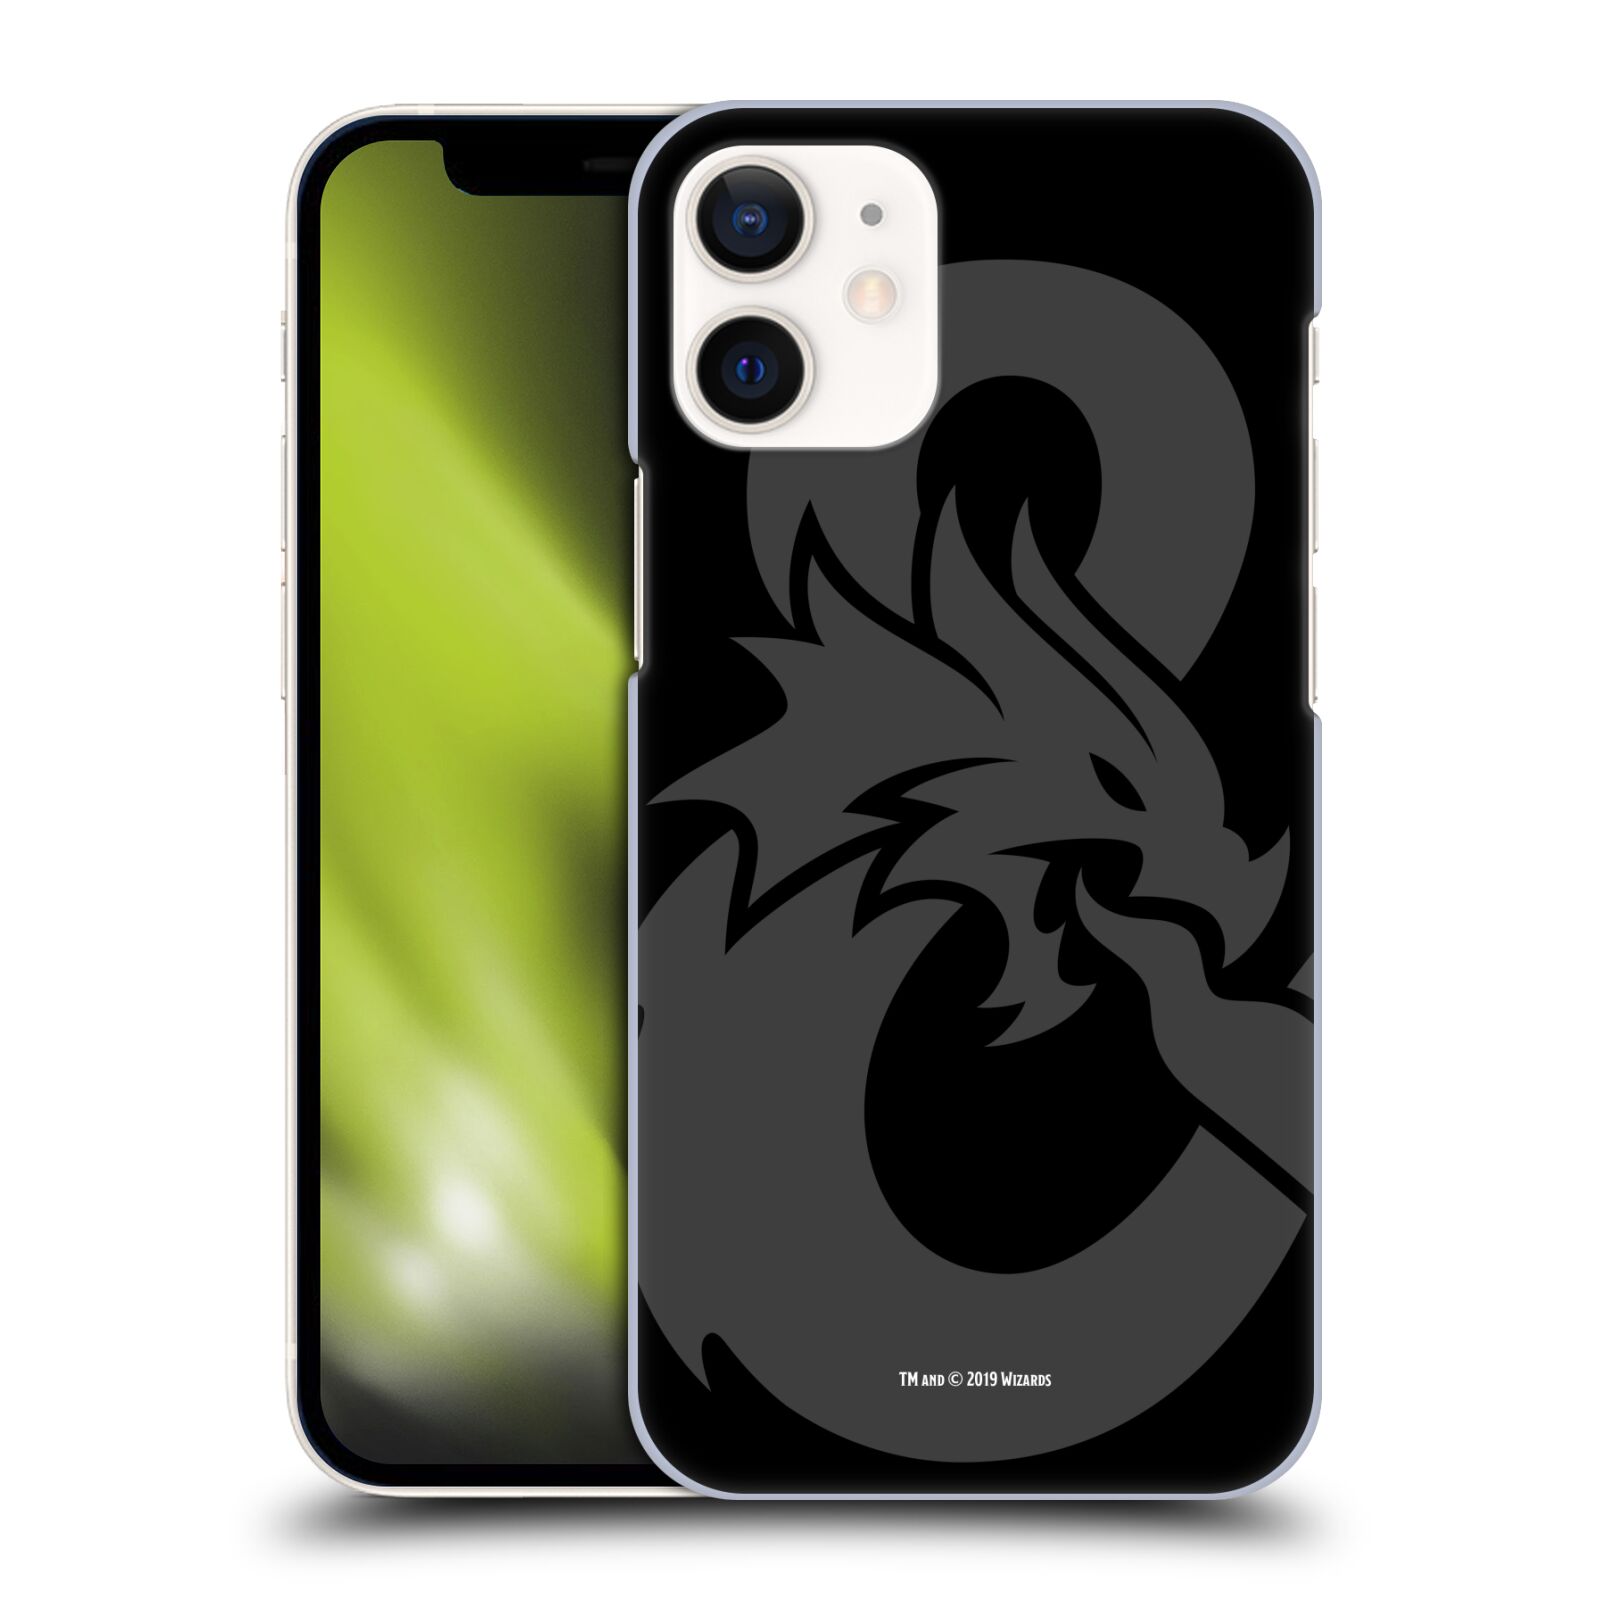 Zadní obal pro mobil Apple iPhone 12 MINI - HEAD CASE - Fantasy - Dungeons and Dragons - Znak